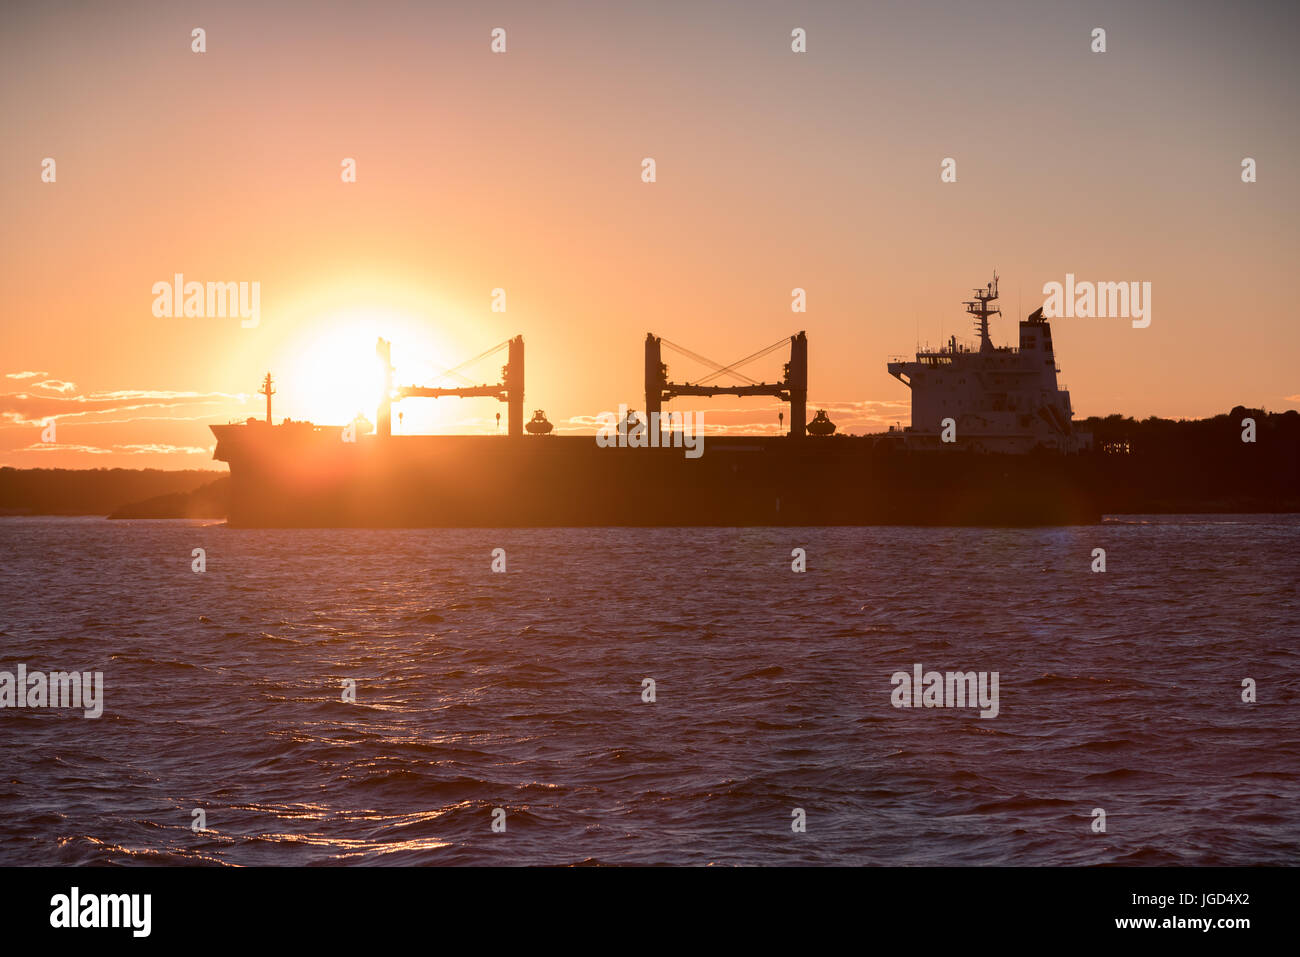 Silhouette of cargo ship at sunset Stock Photo